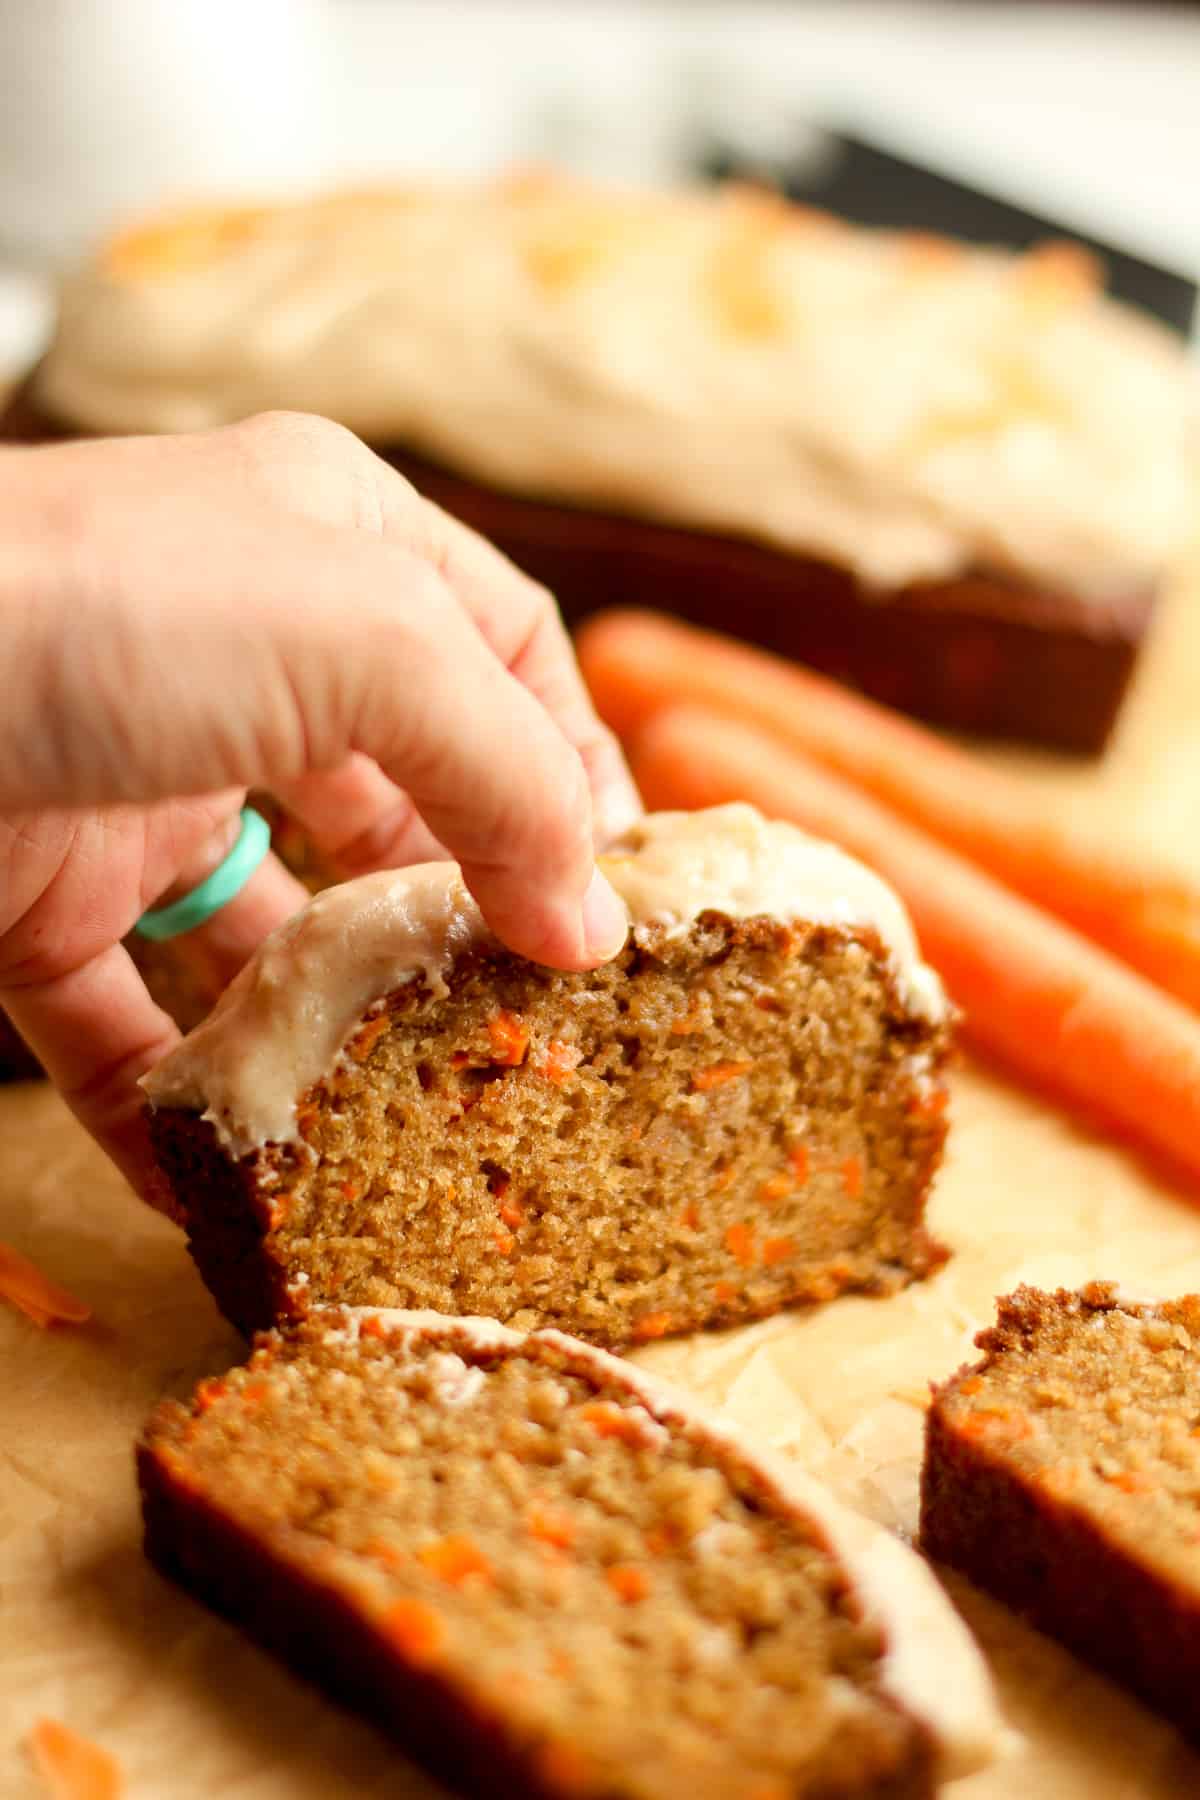 My hand picking up a piece of moist carrot cake bread.